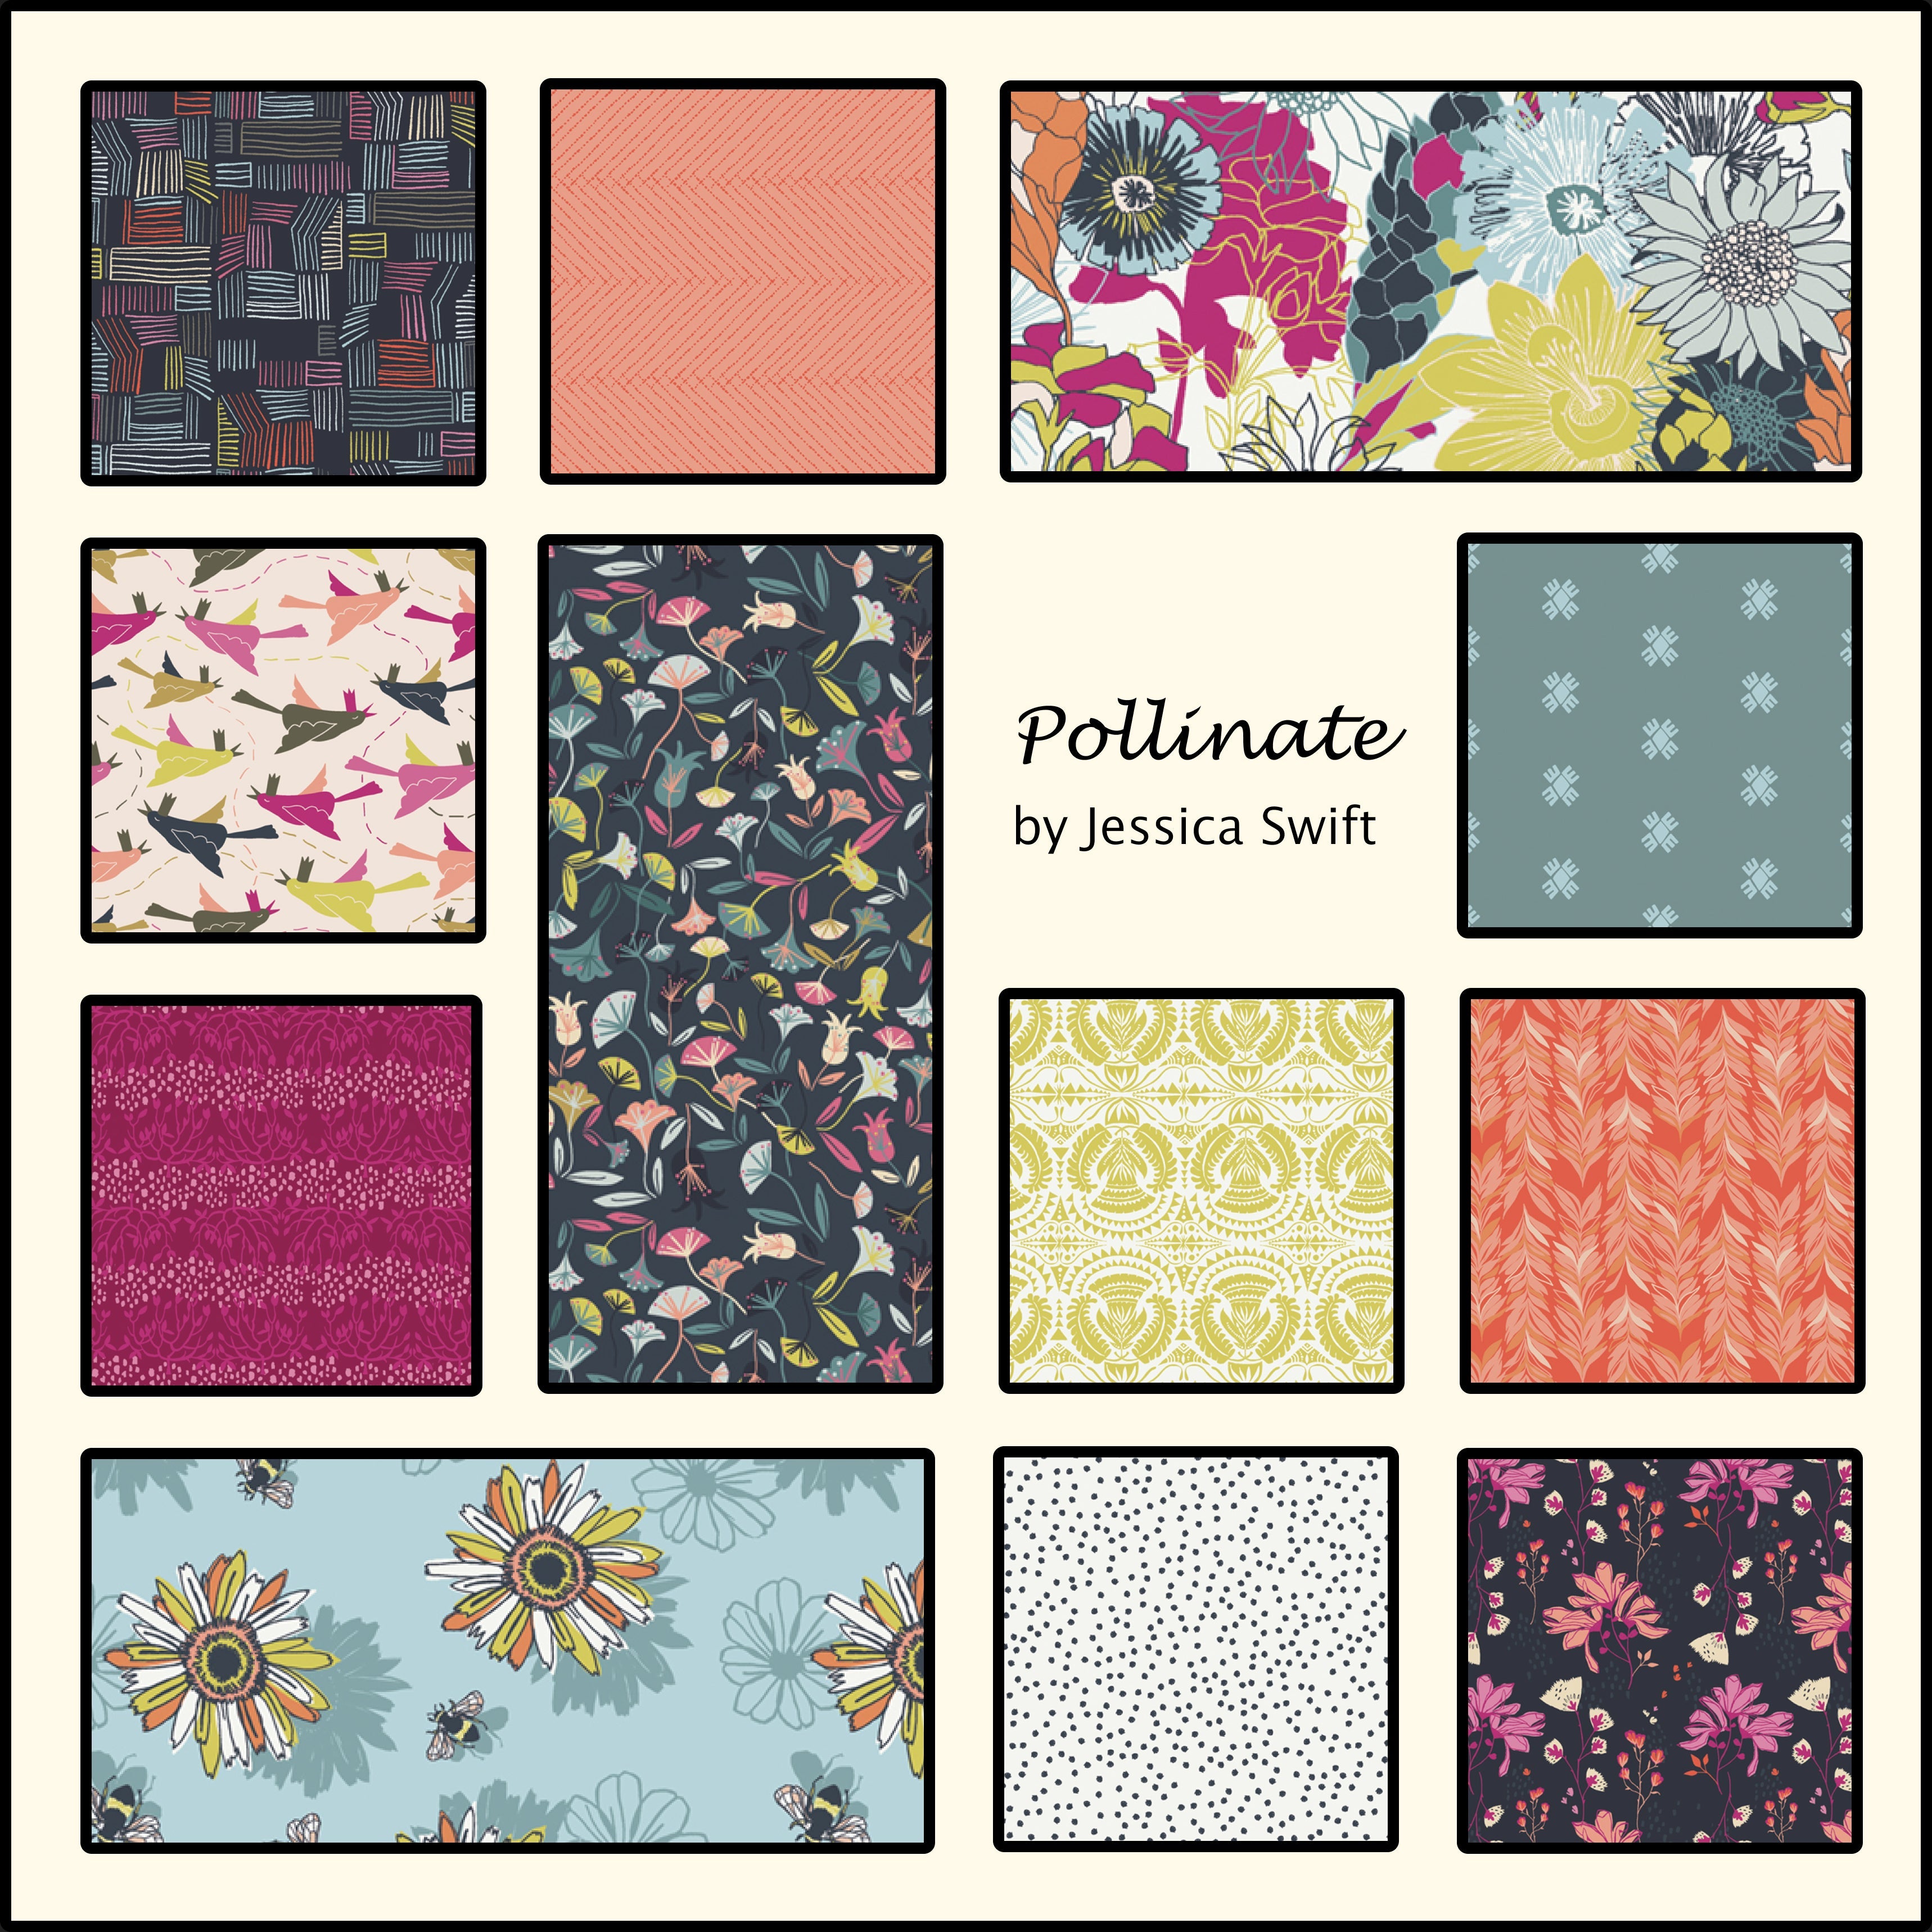 The image shows twelve fabric swatches from the collection “Pollinate” by Jessica Swift. The swatches are in a variety of bright colors and patterns reminiscent of Spring.